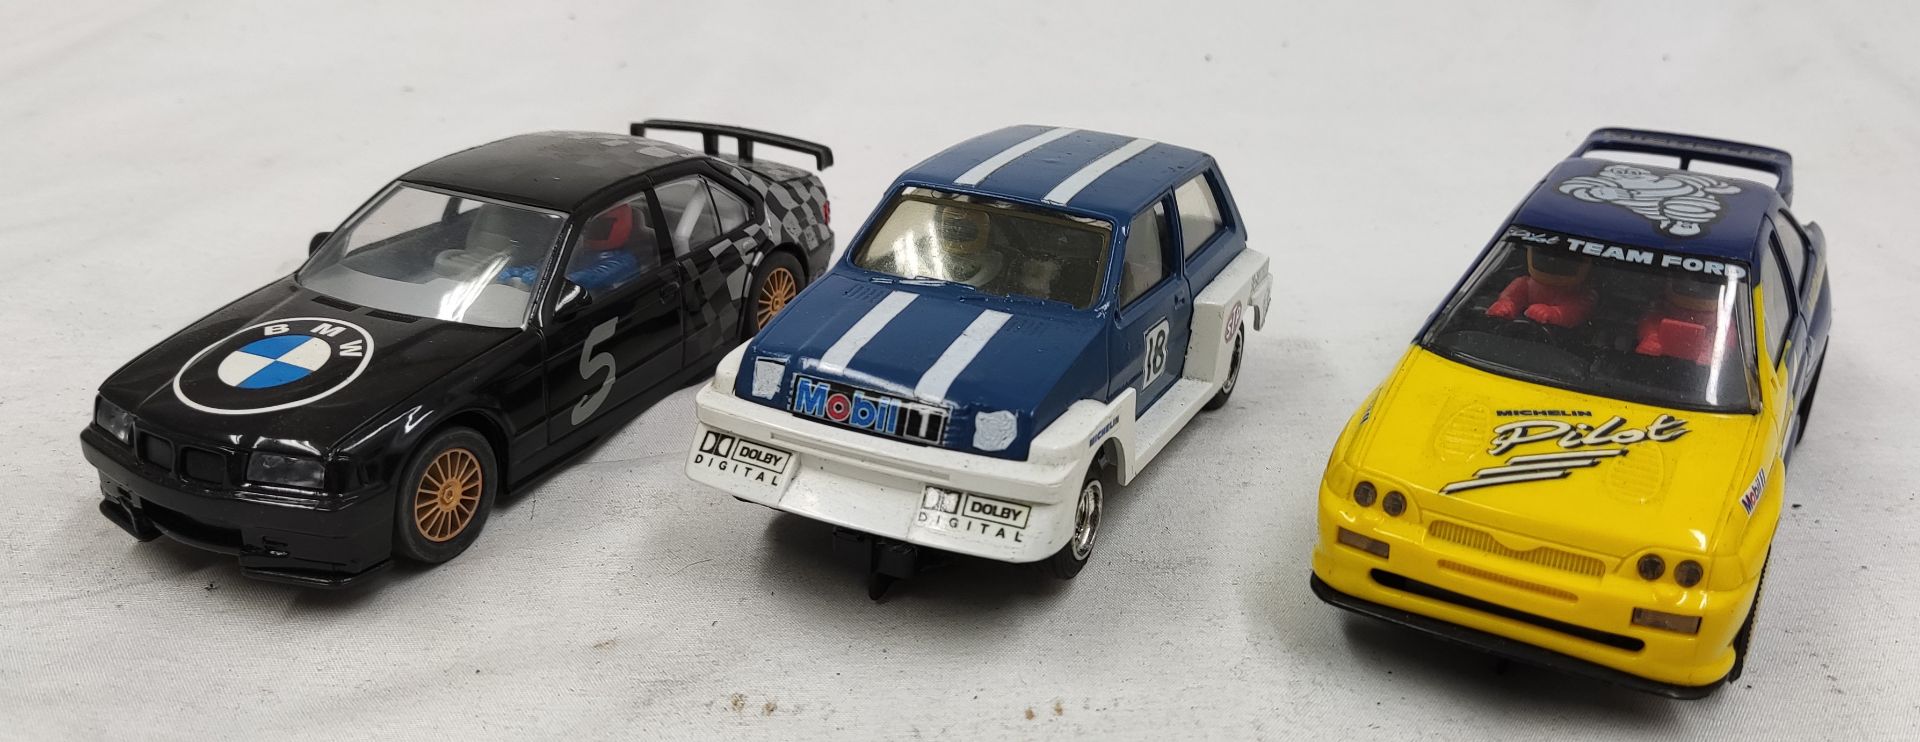 3 x Retro Scalextric Cars - BMW, Metro and Ford - Tested and Working - Used - CL444 - NO VAT ON - Image 7 of 8